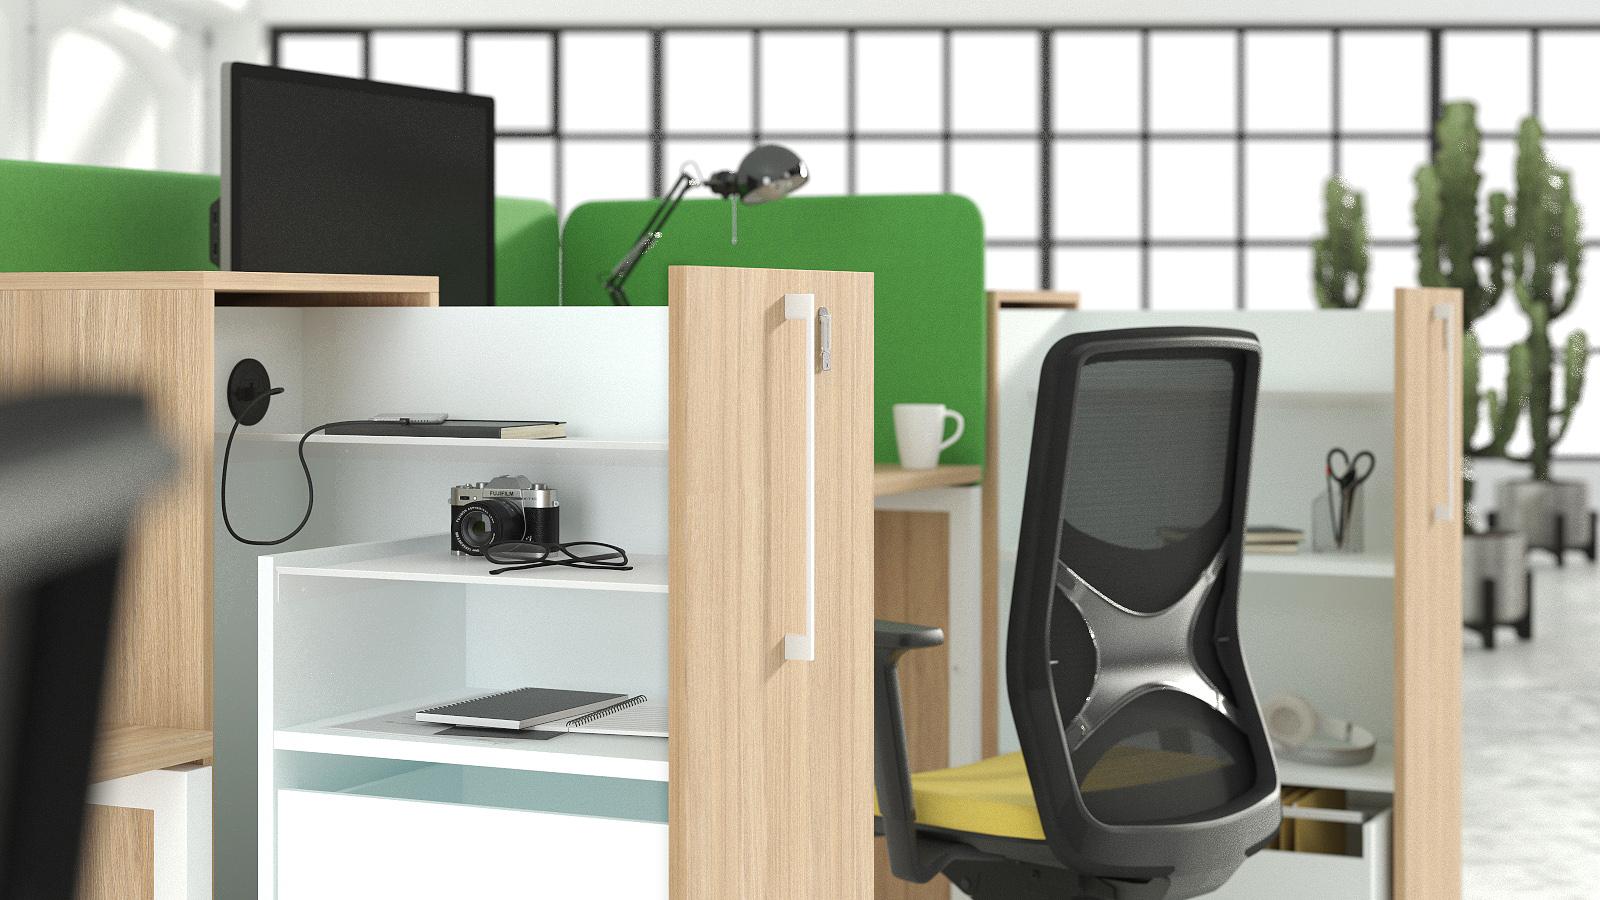 BOXI storage towers are a simple and universal solution designed to accommodate all office essentials for daily needs.